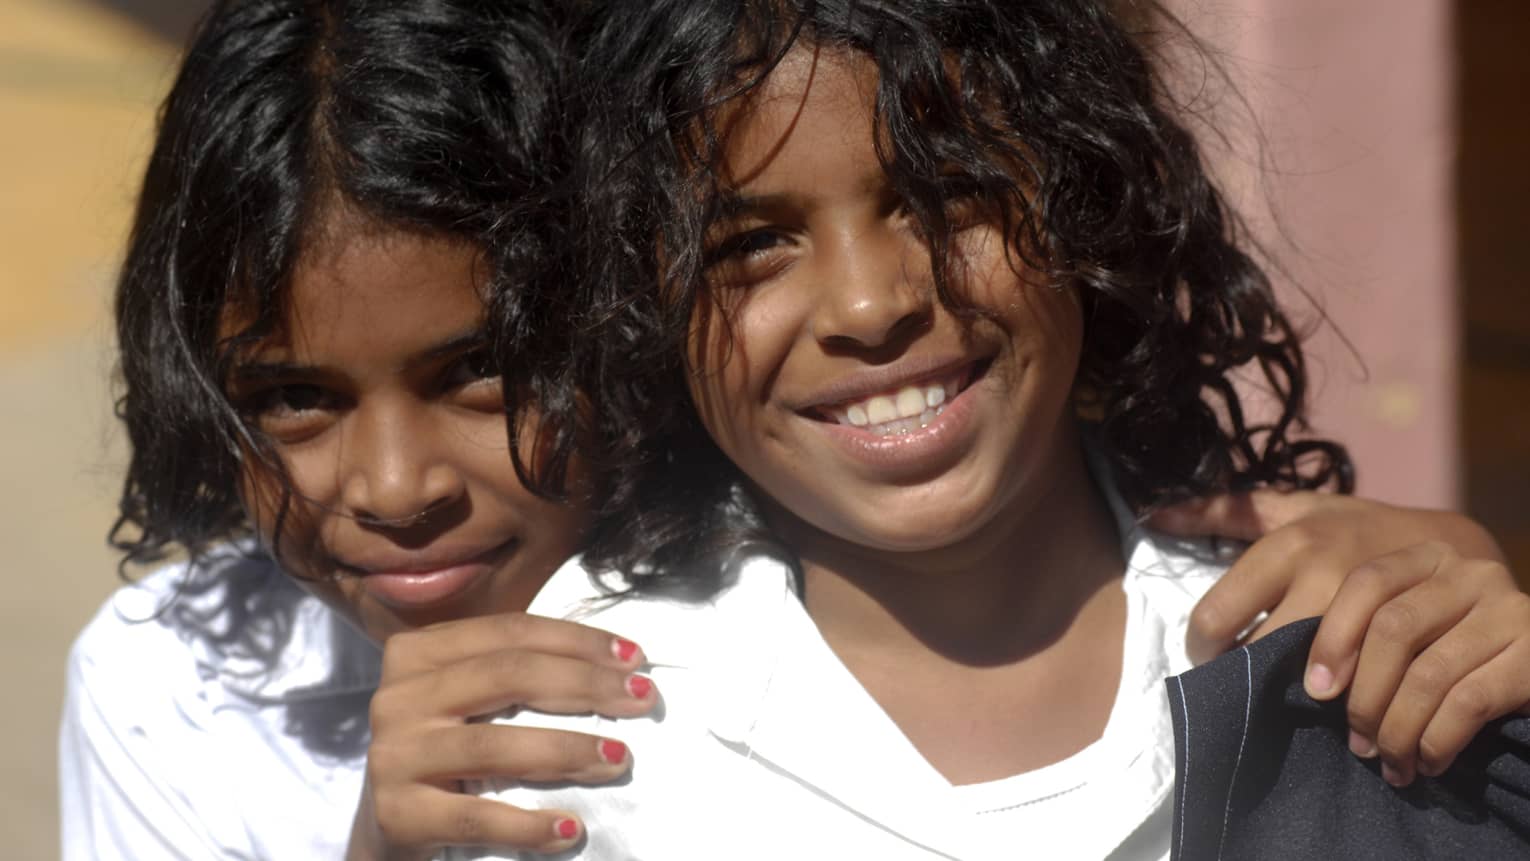 Close-up of two young smiling children, one with hands on the other's shoulders